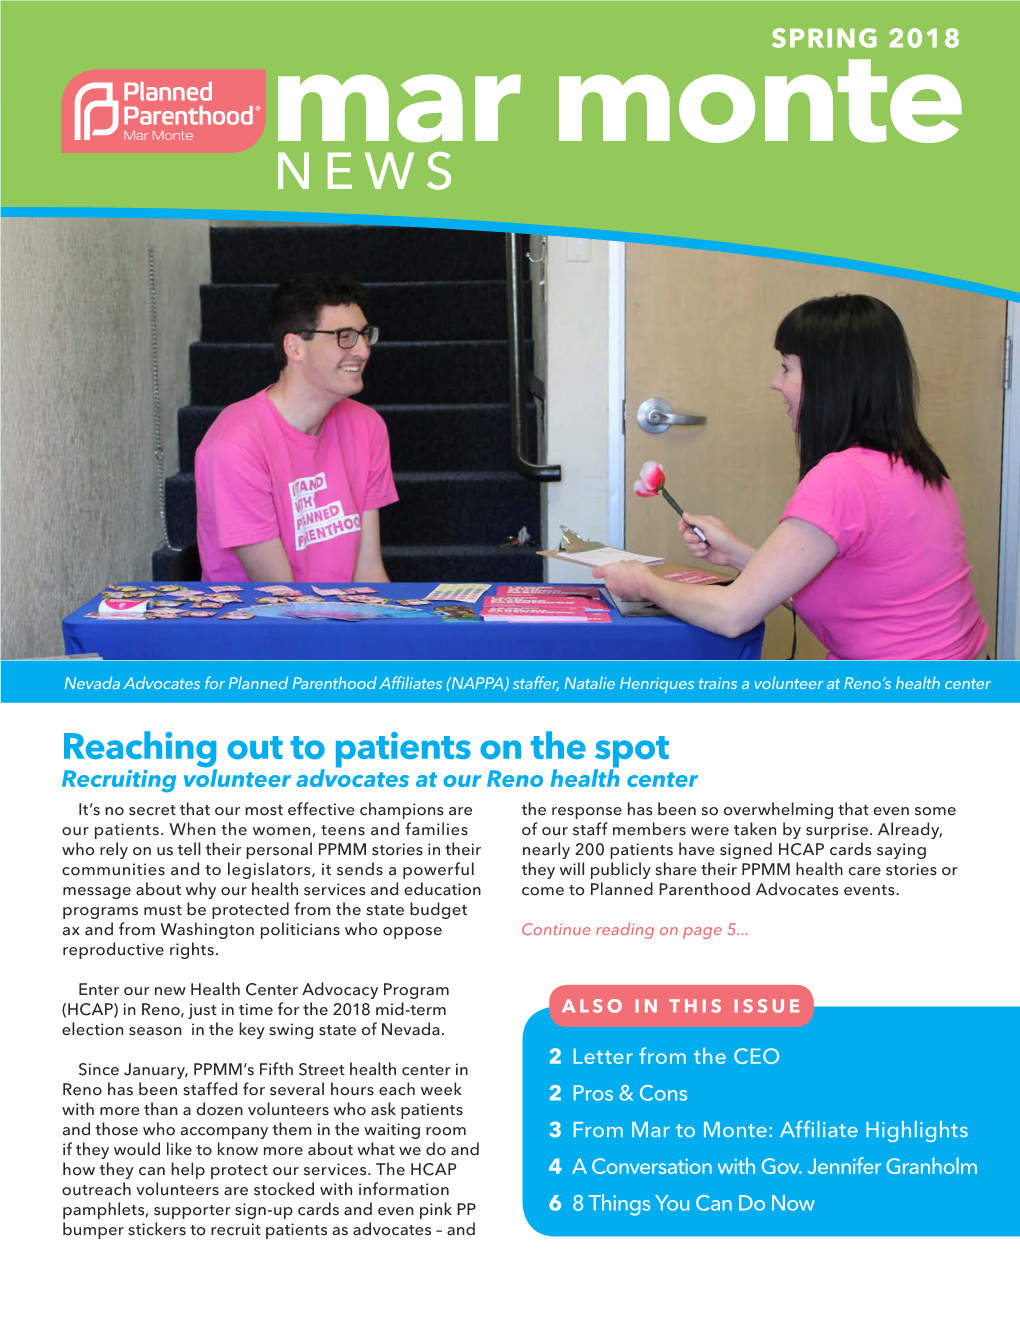 Reaching out to Patients on the Spot